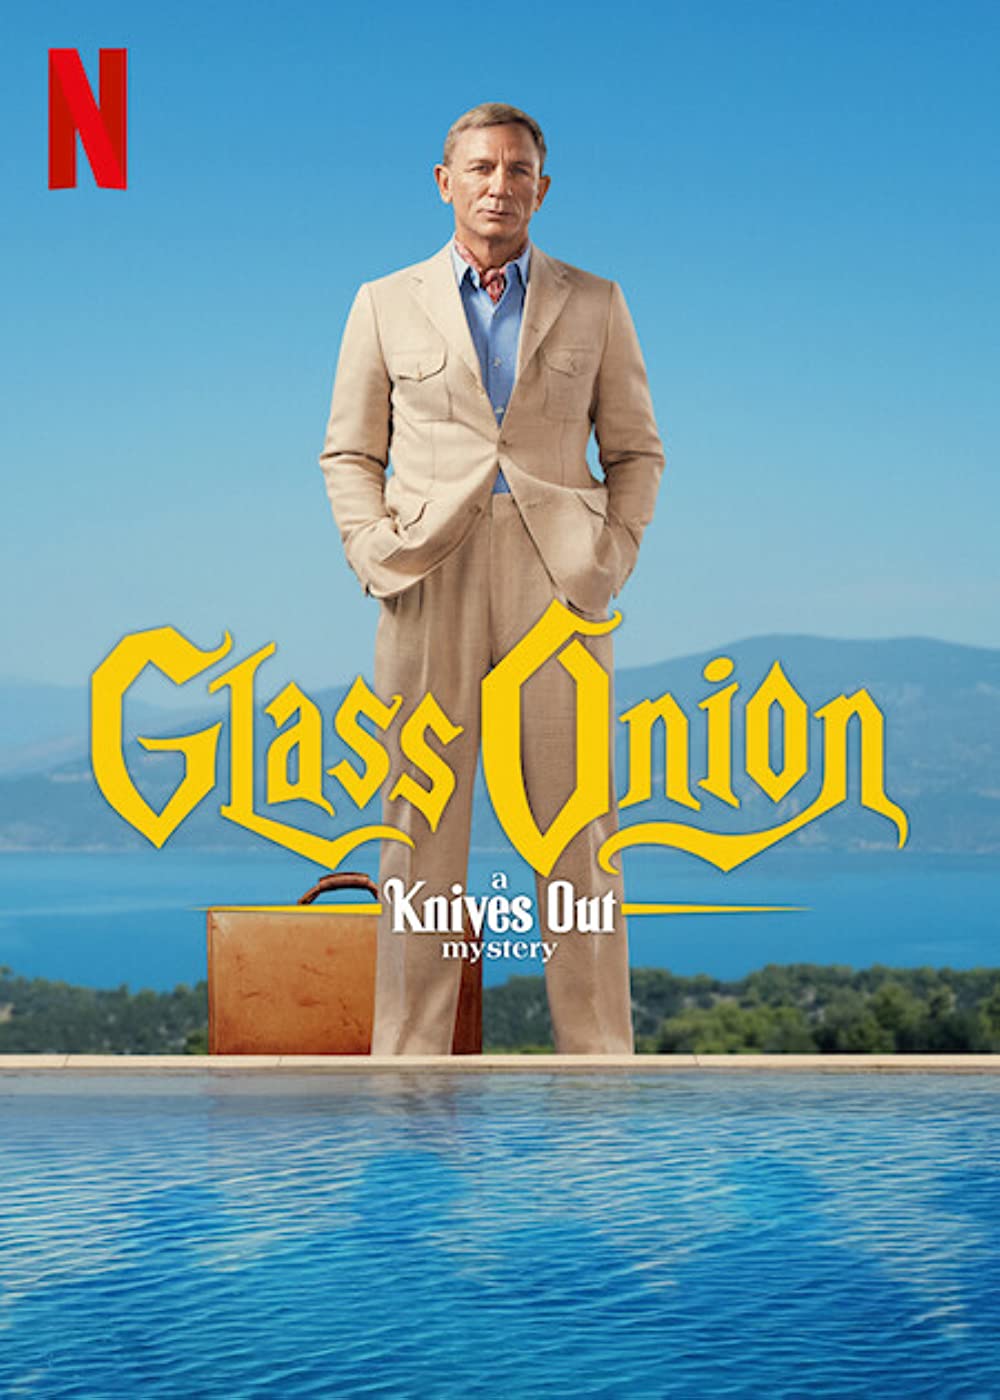 Imdb Knives Out 2 Okay but for real, how great is Glass Onion?